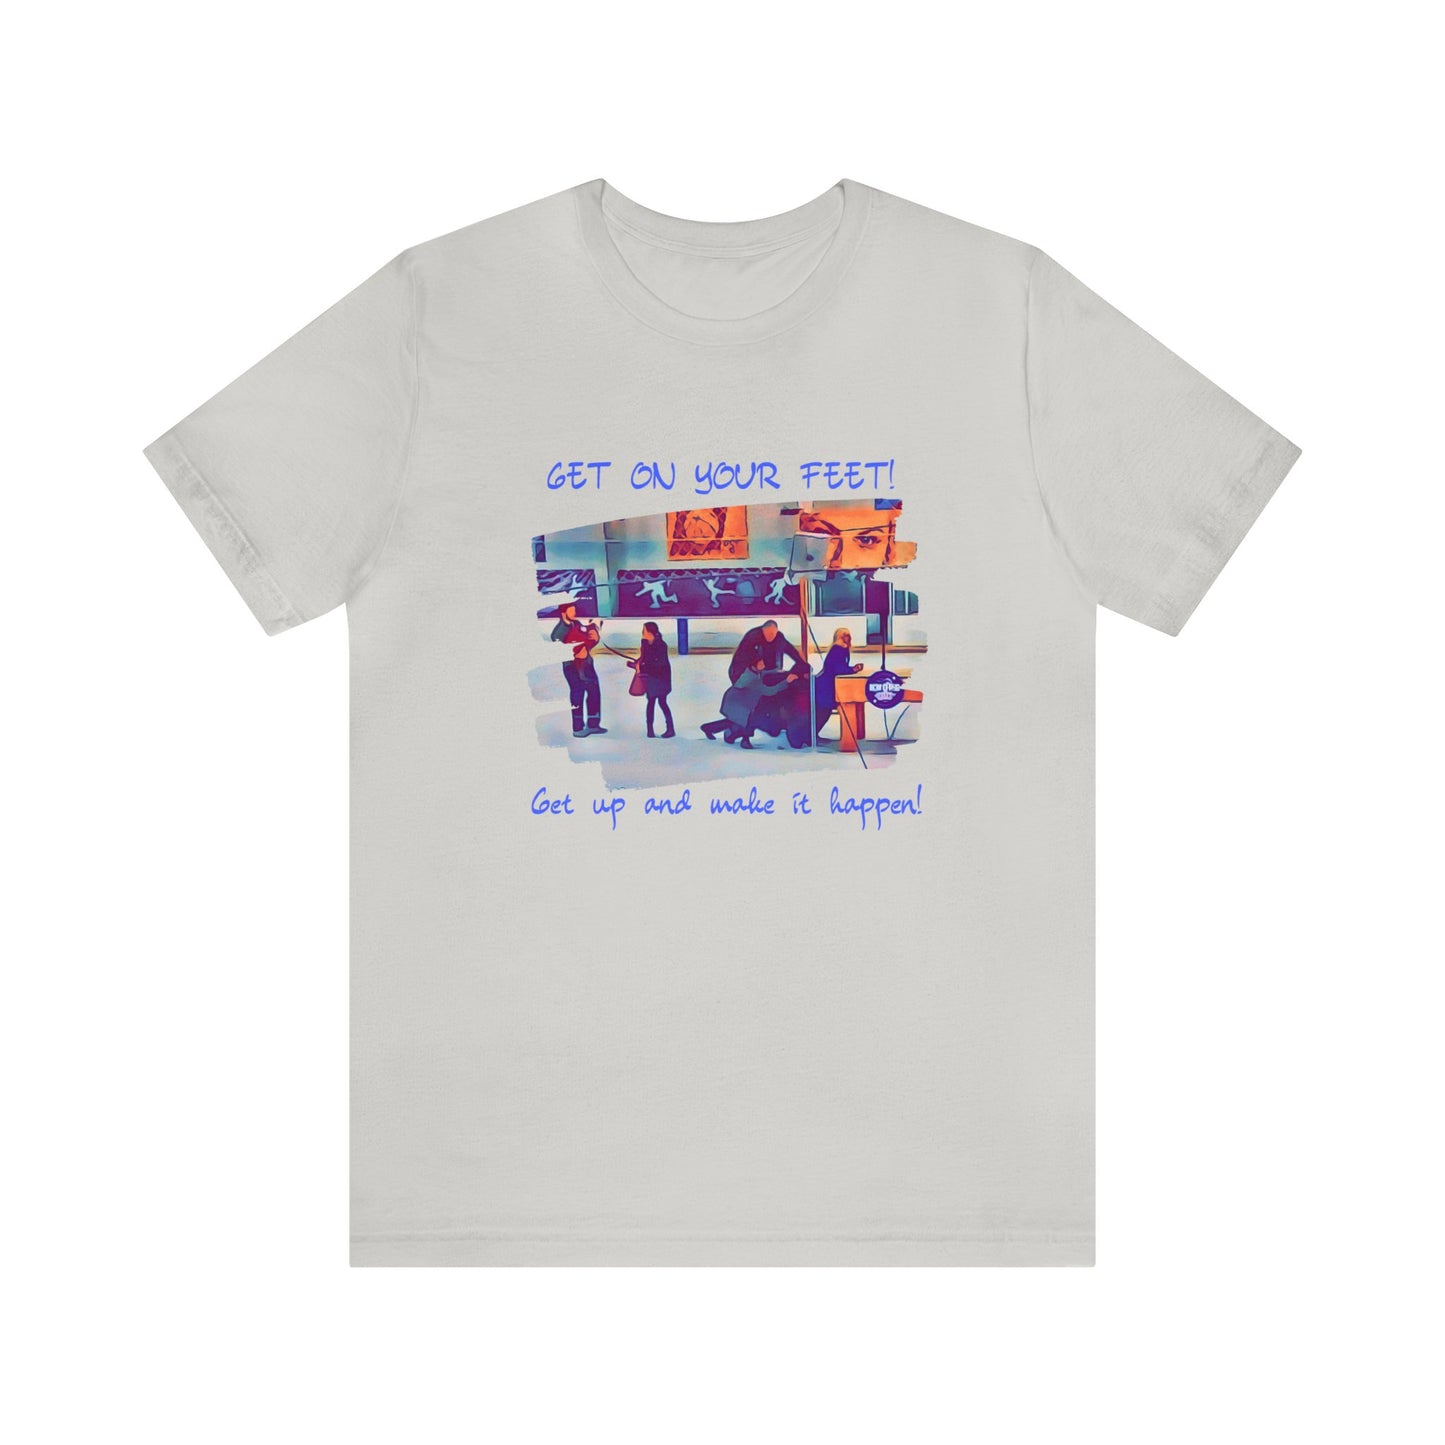 Parks and recs tee